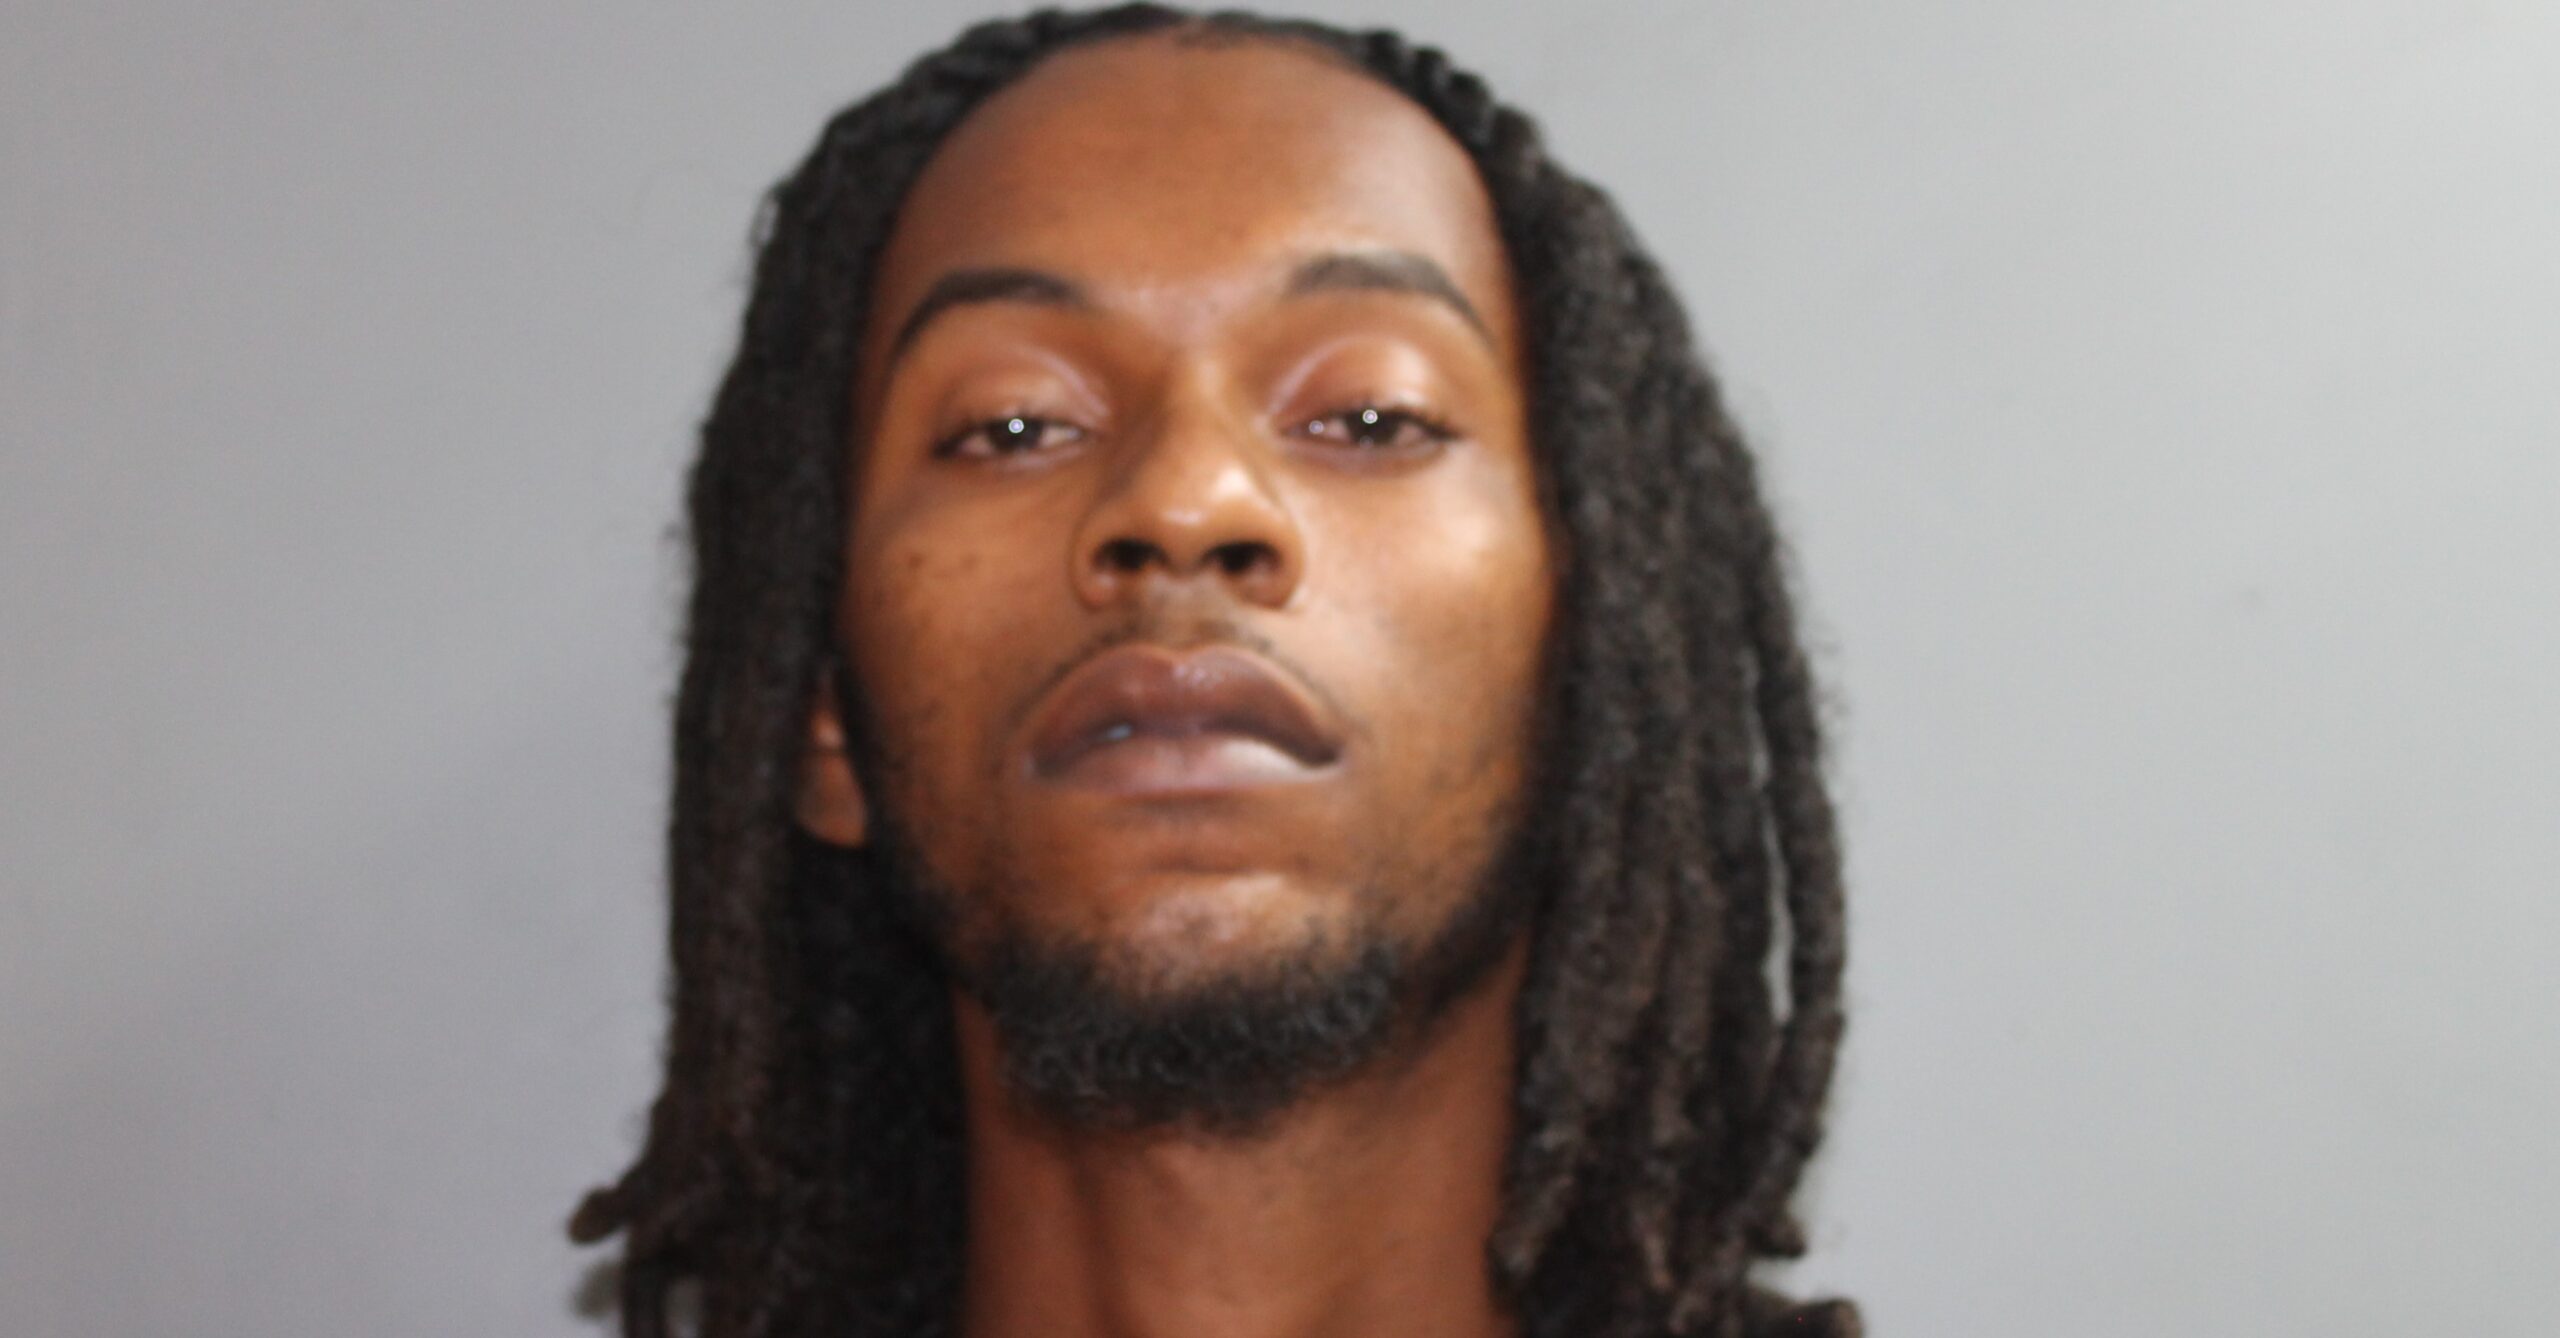 Second St. Croix Man Accused In Shooting 3 People At Castle Coakley Arrested